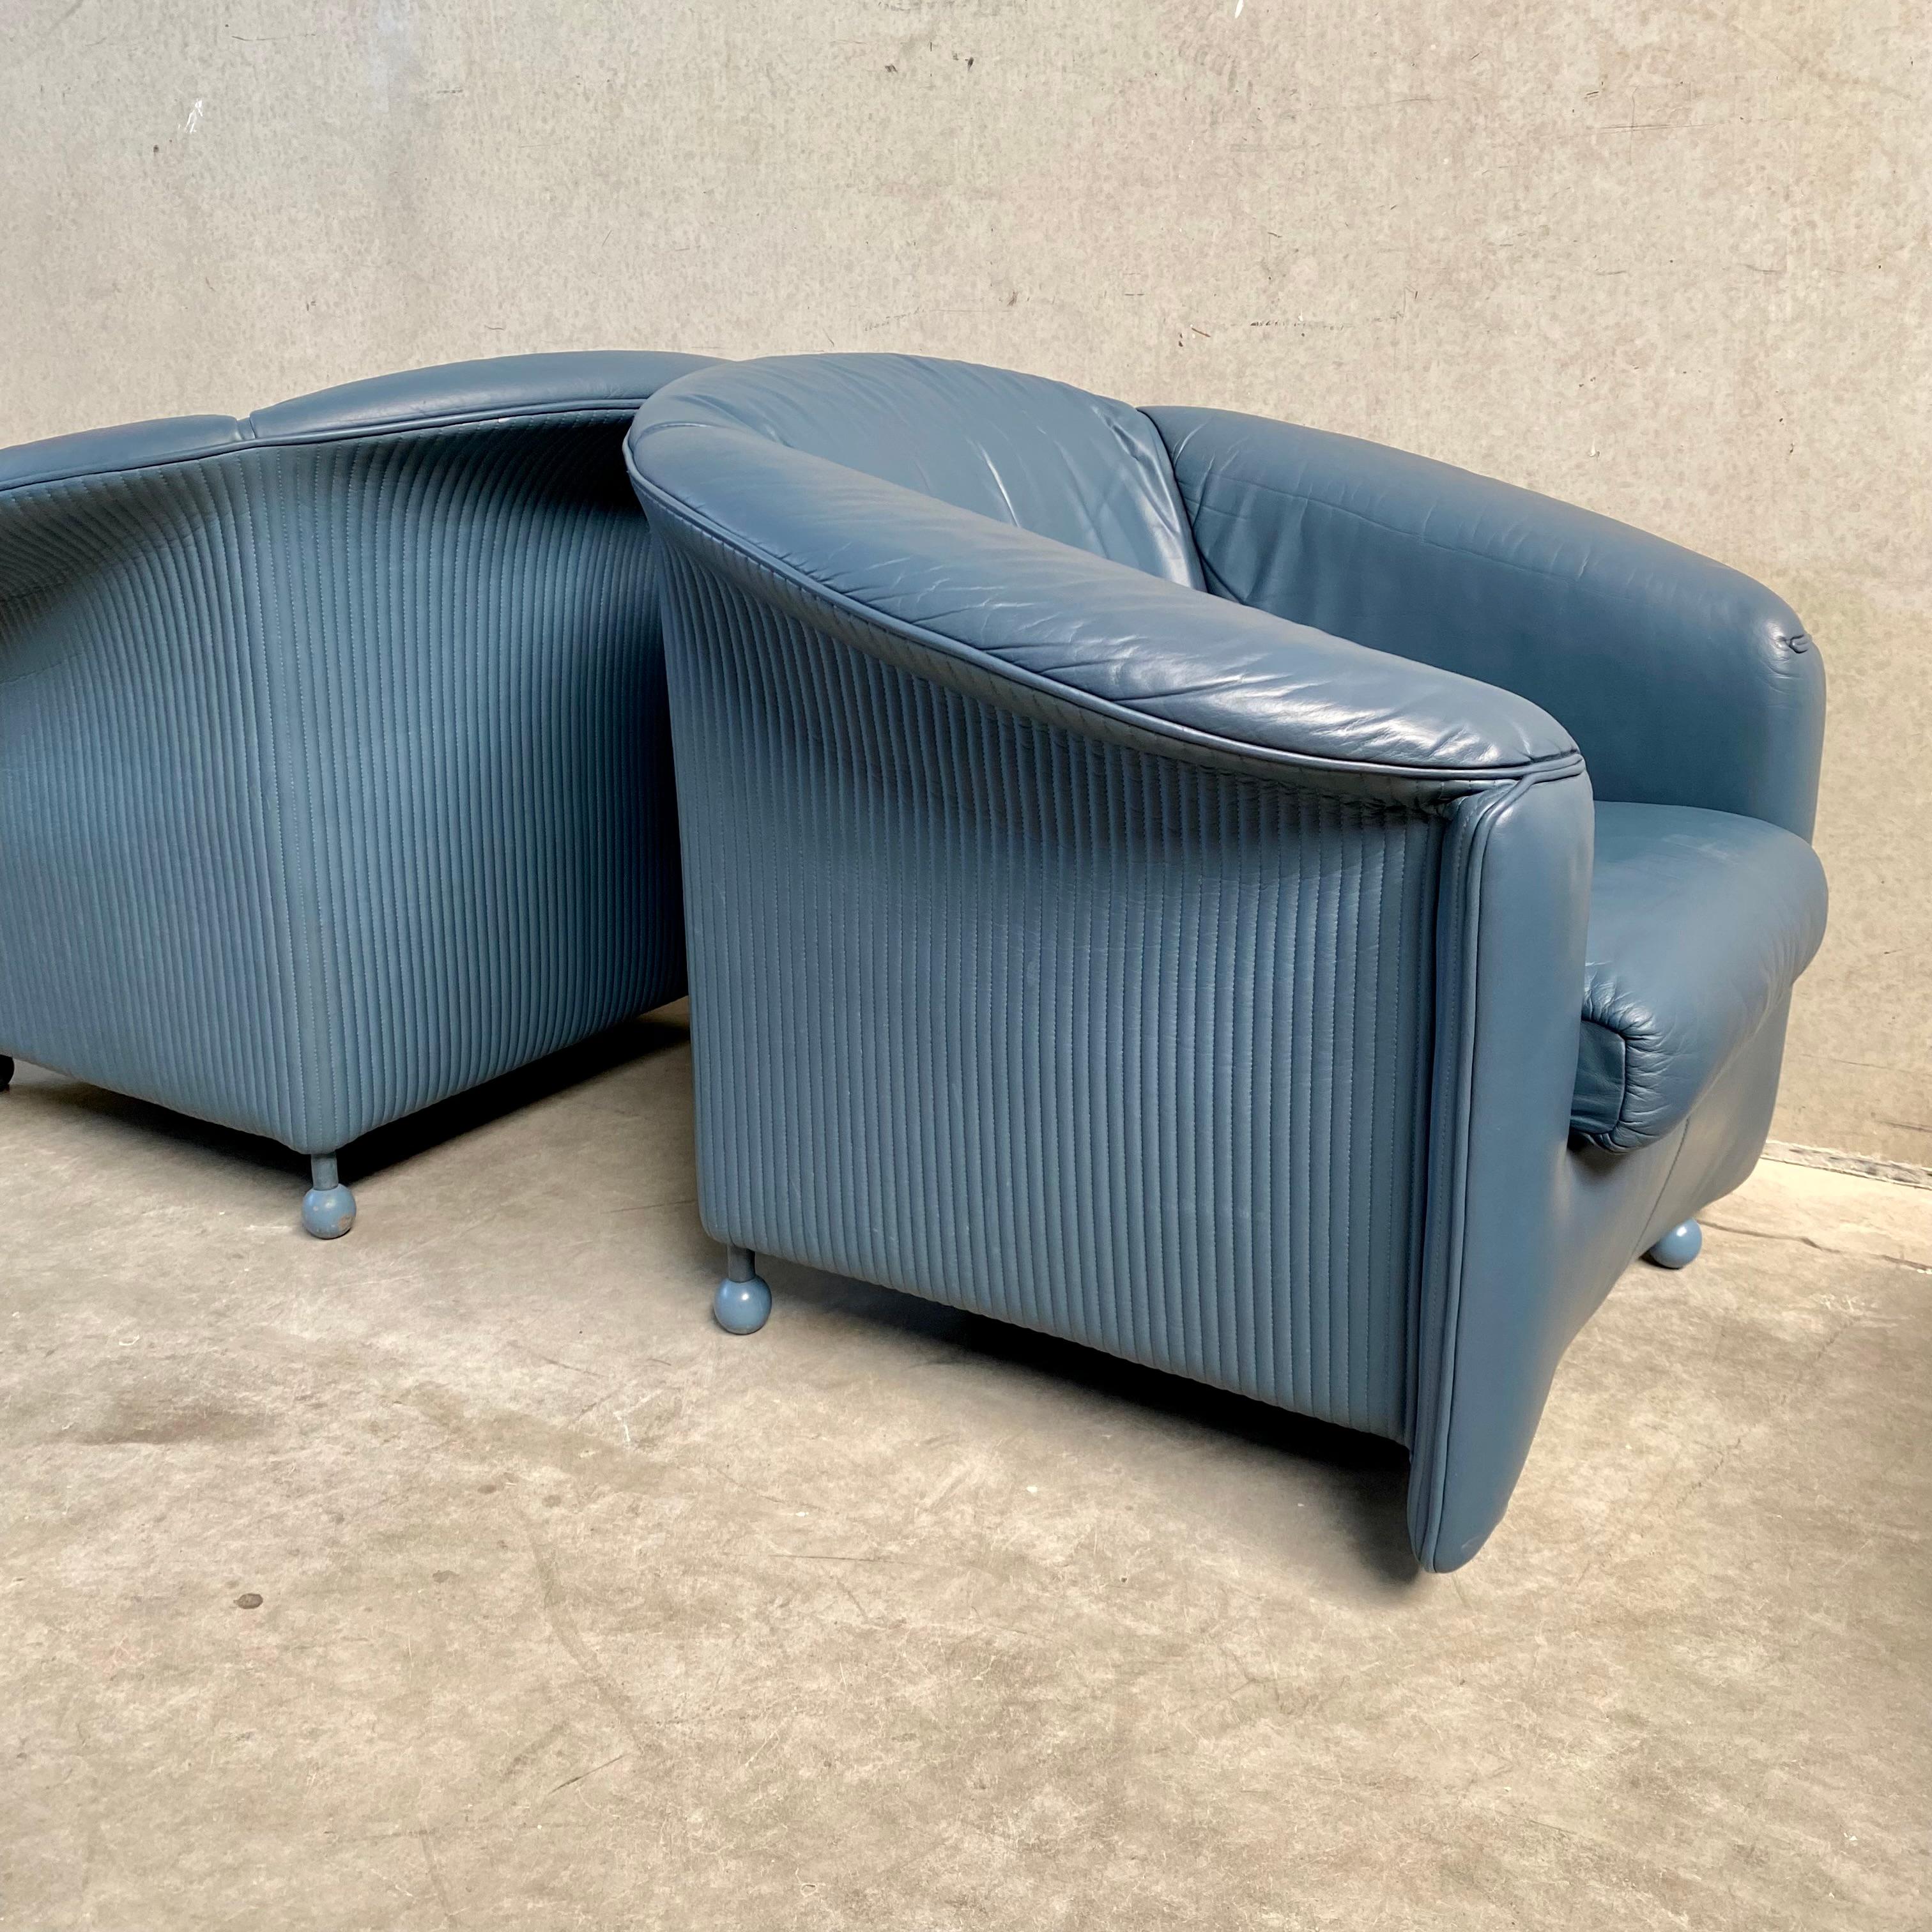 Set of 2 Vintage Leather Arm Chairs by Paolo Piva for Wittmann, Austria 1980s For Sale 6